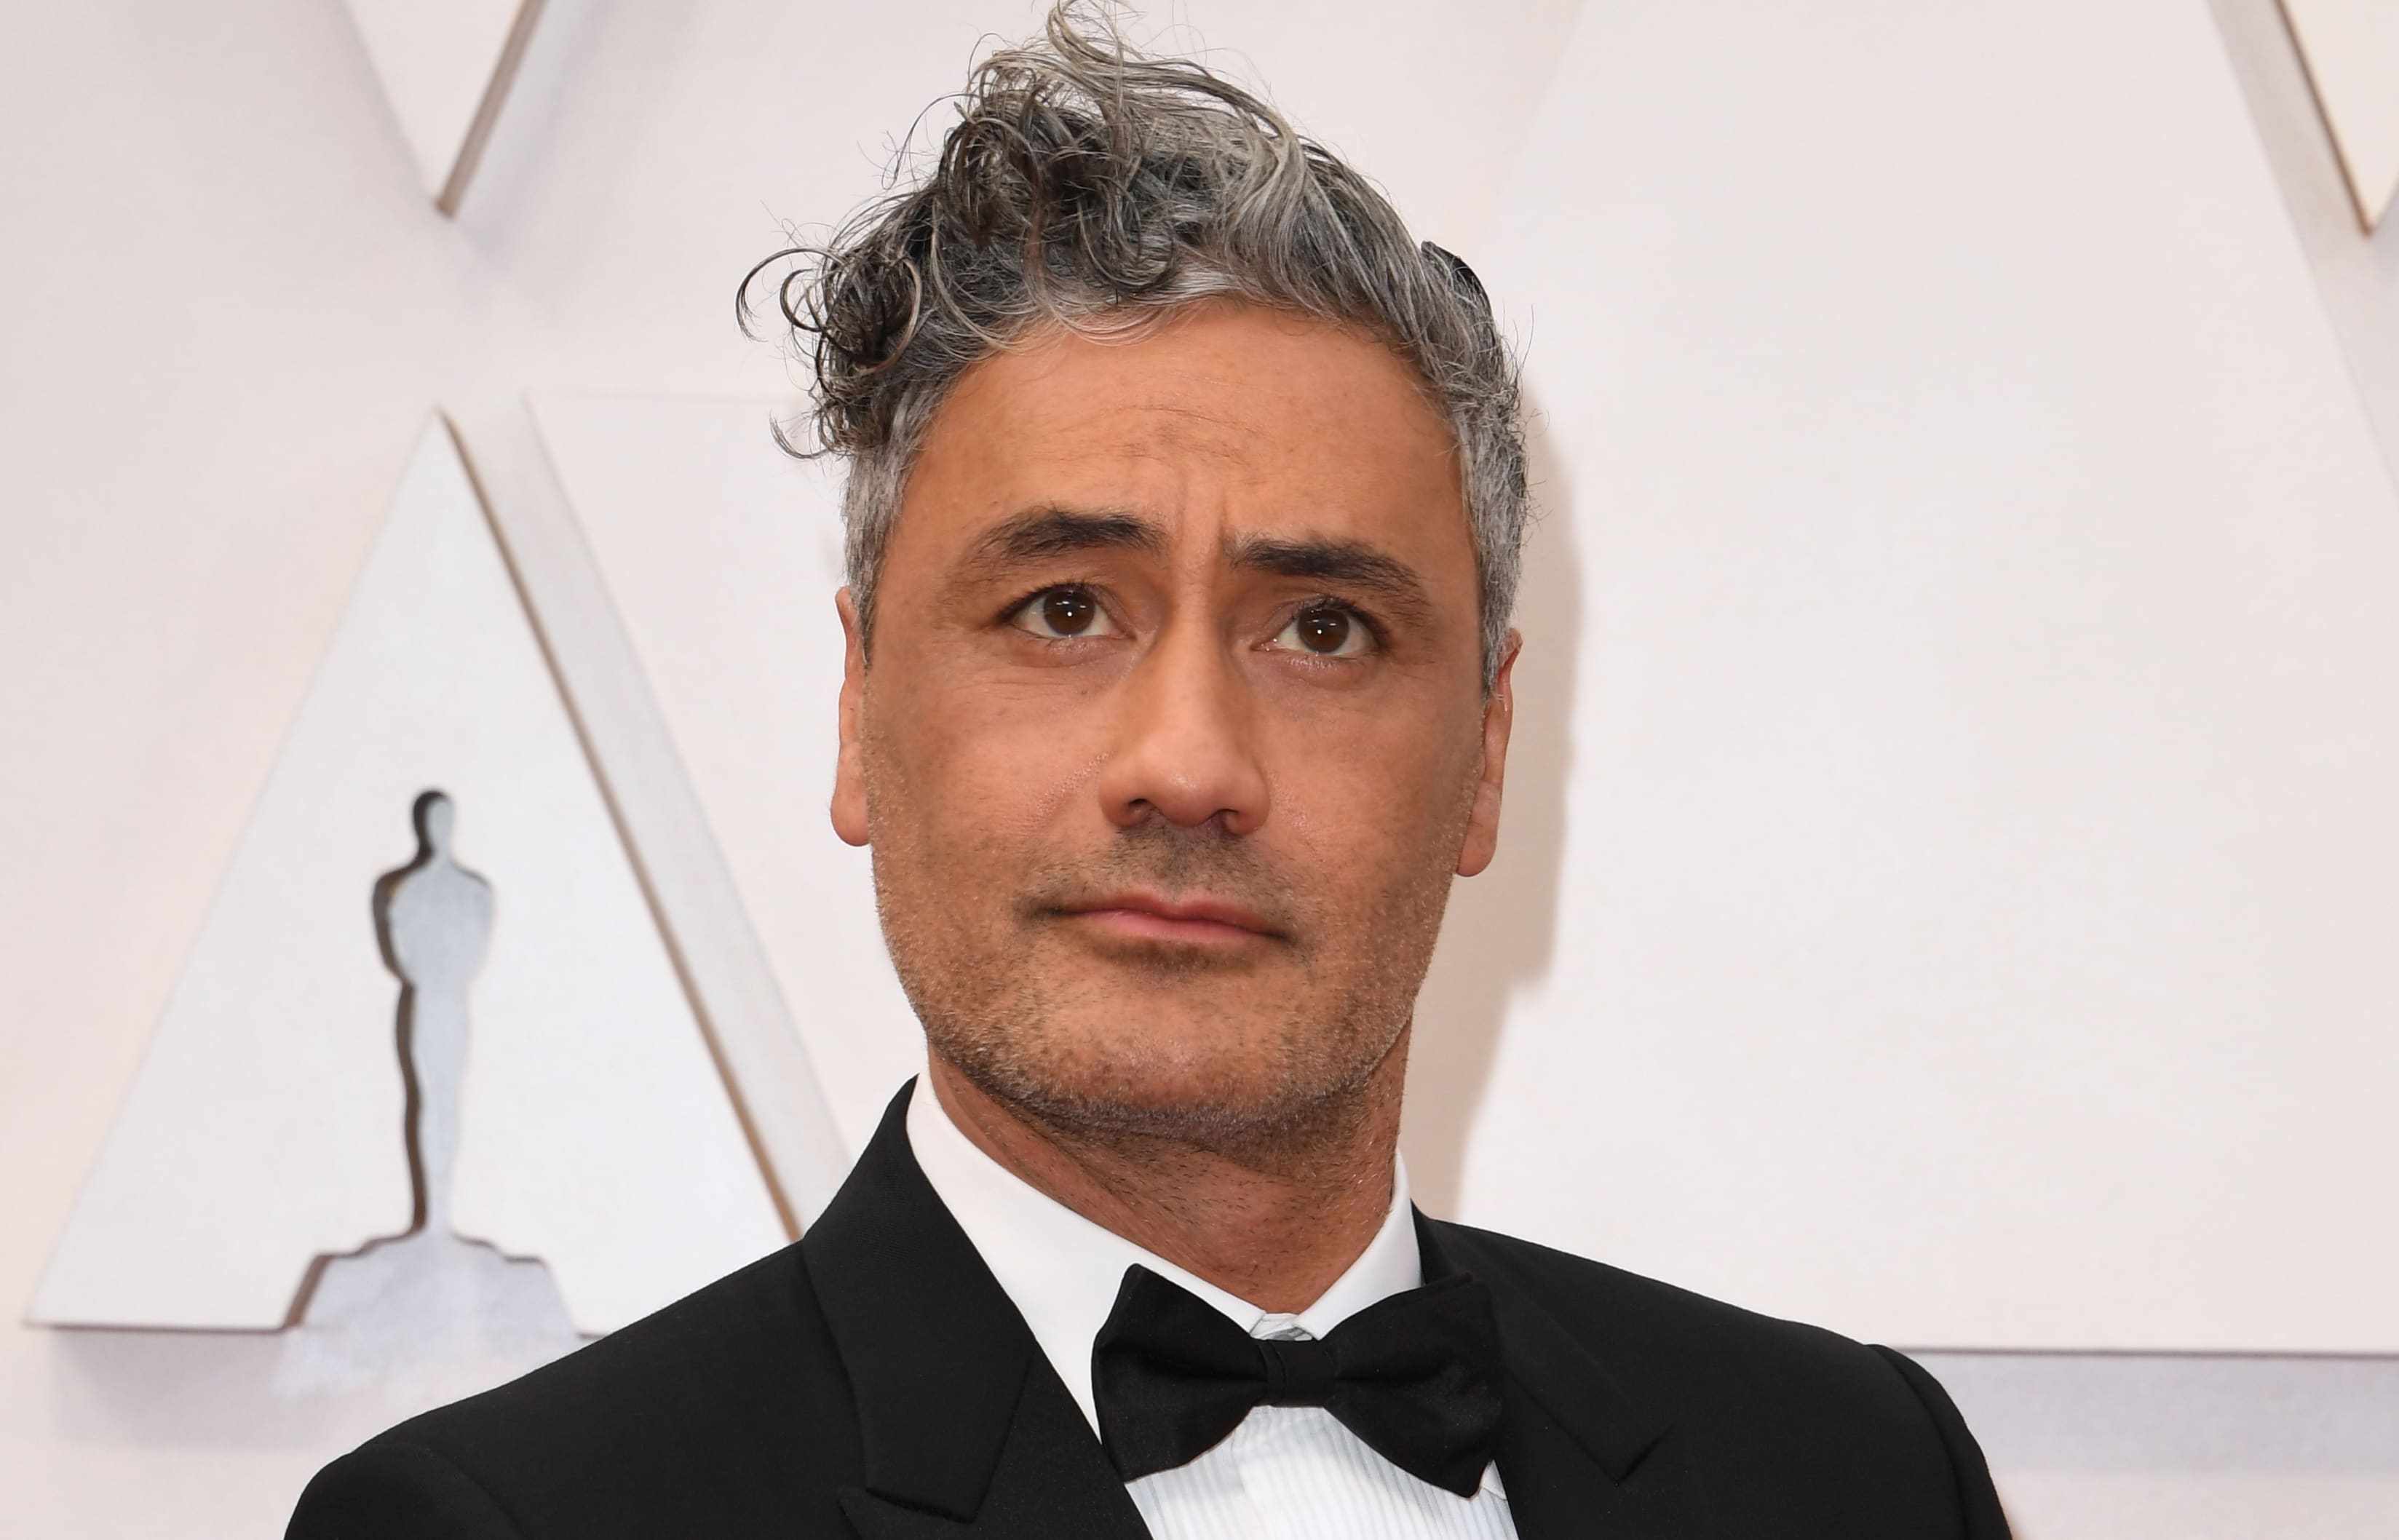 New Zealand director and actor Taika Waititi arrives for the 92nd Oscars at the Dolby Theatre in Hollywood, California on February 9, 2020. (Photo by Robyn Beck / AFP)